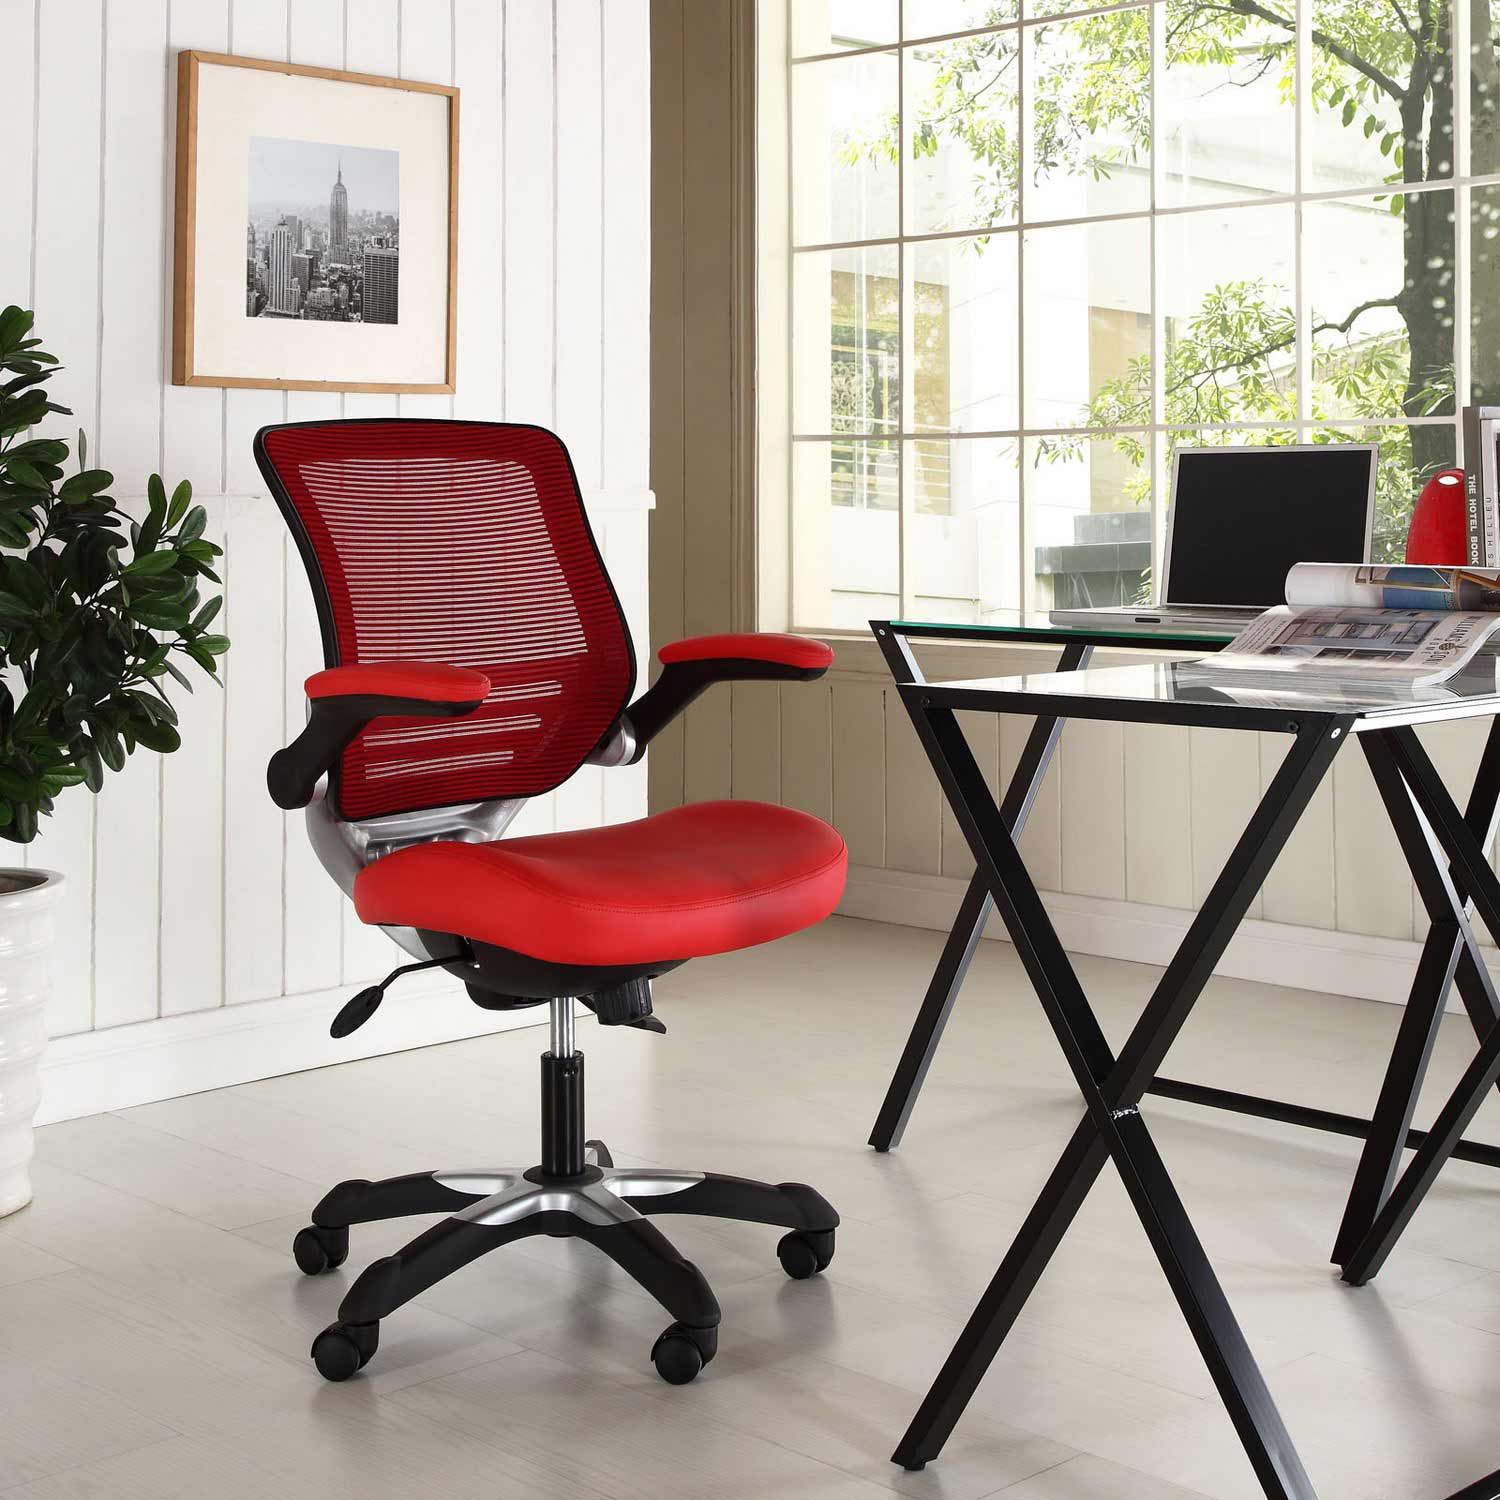 Modway Edge Vinyl Office Chair - Red